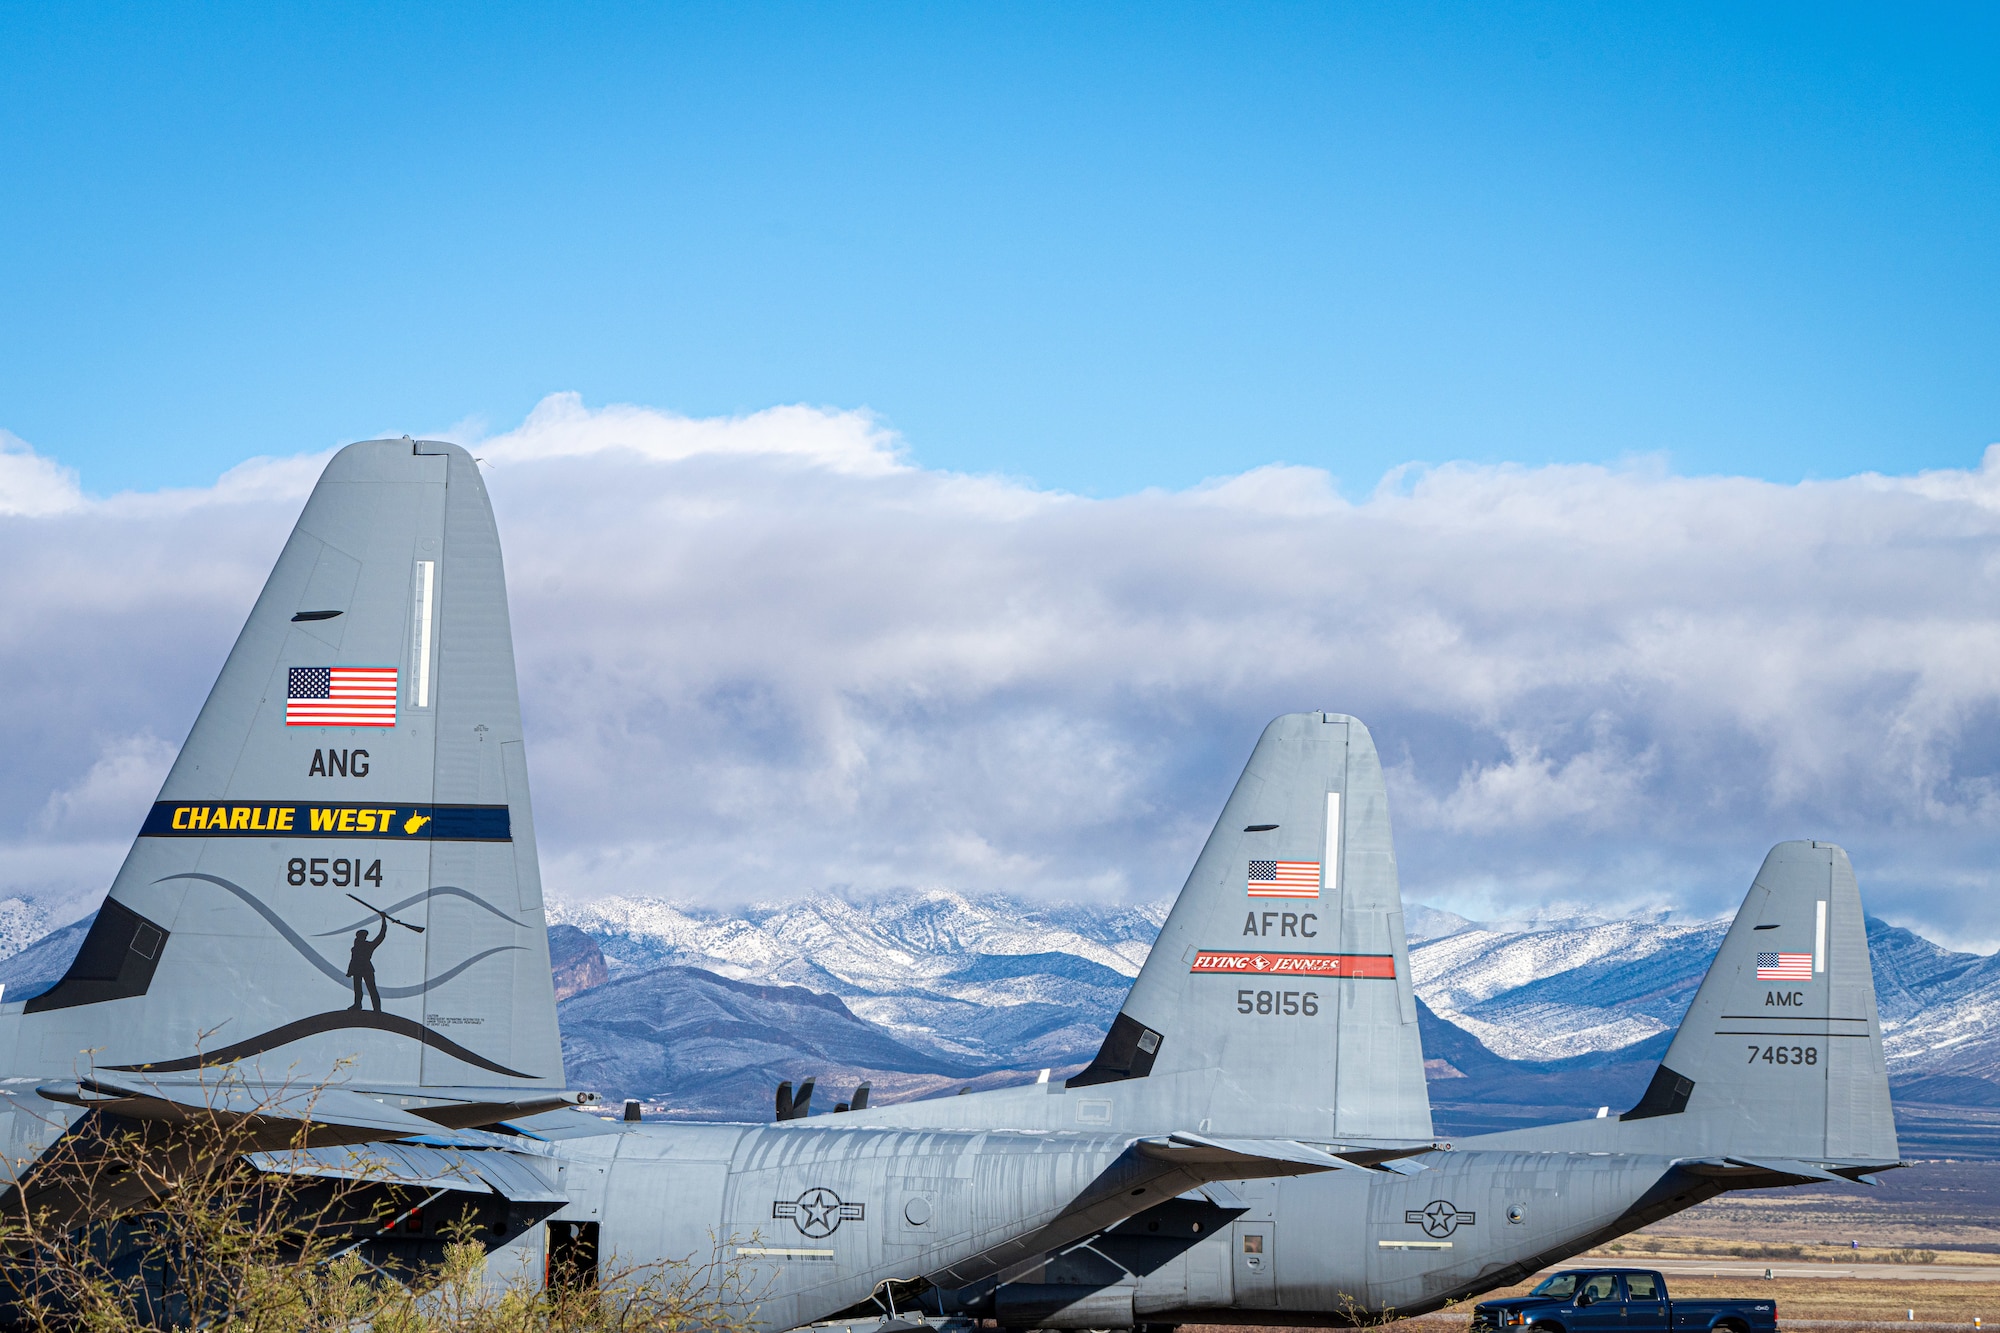 U.S. Air Force C-130J Hercules aircraft from the 130th Airlift Wing, West Virginia Air National Guard, 815th Airlift Squadron, and 39th Airlift Squadron, sit on the flight line at Fort Huachuca, Arizona, December 13, 2022. The Hercules crews were attending the Advanced Tactics Aircrew Course held by the Advanced Airlift Tactics Training Center. Since 1983 the AATTC has provided advanced tactical training to airlift aircrews from the Air National Guard, Air Force Reserve Command, Air Mobility Command, U.S. Marine Corps and 17 allied nations. (U.S. Air National Guard photo by Tech. Sgt. Patrick Evenson)